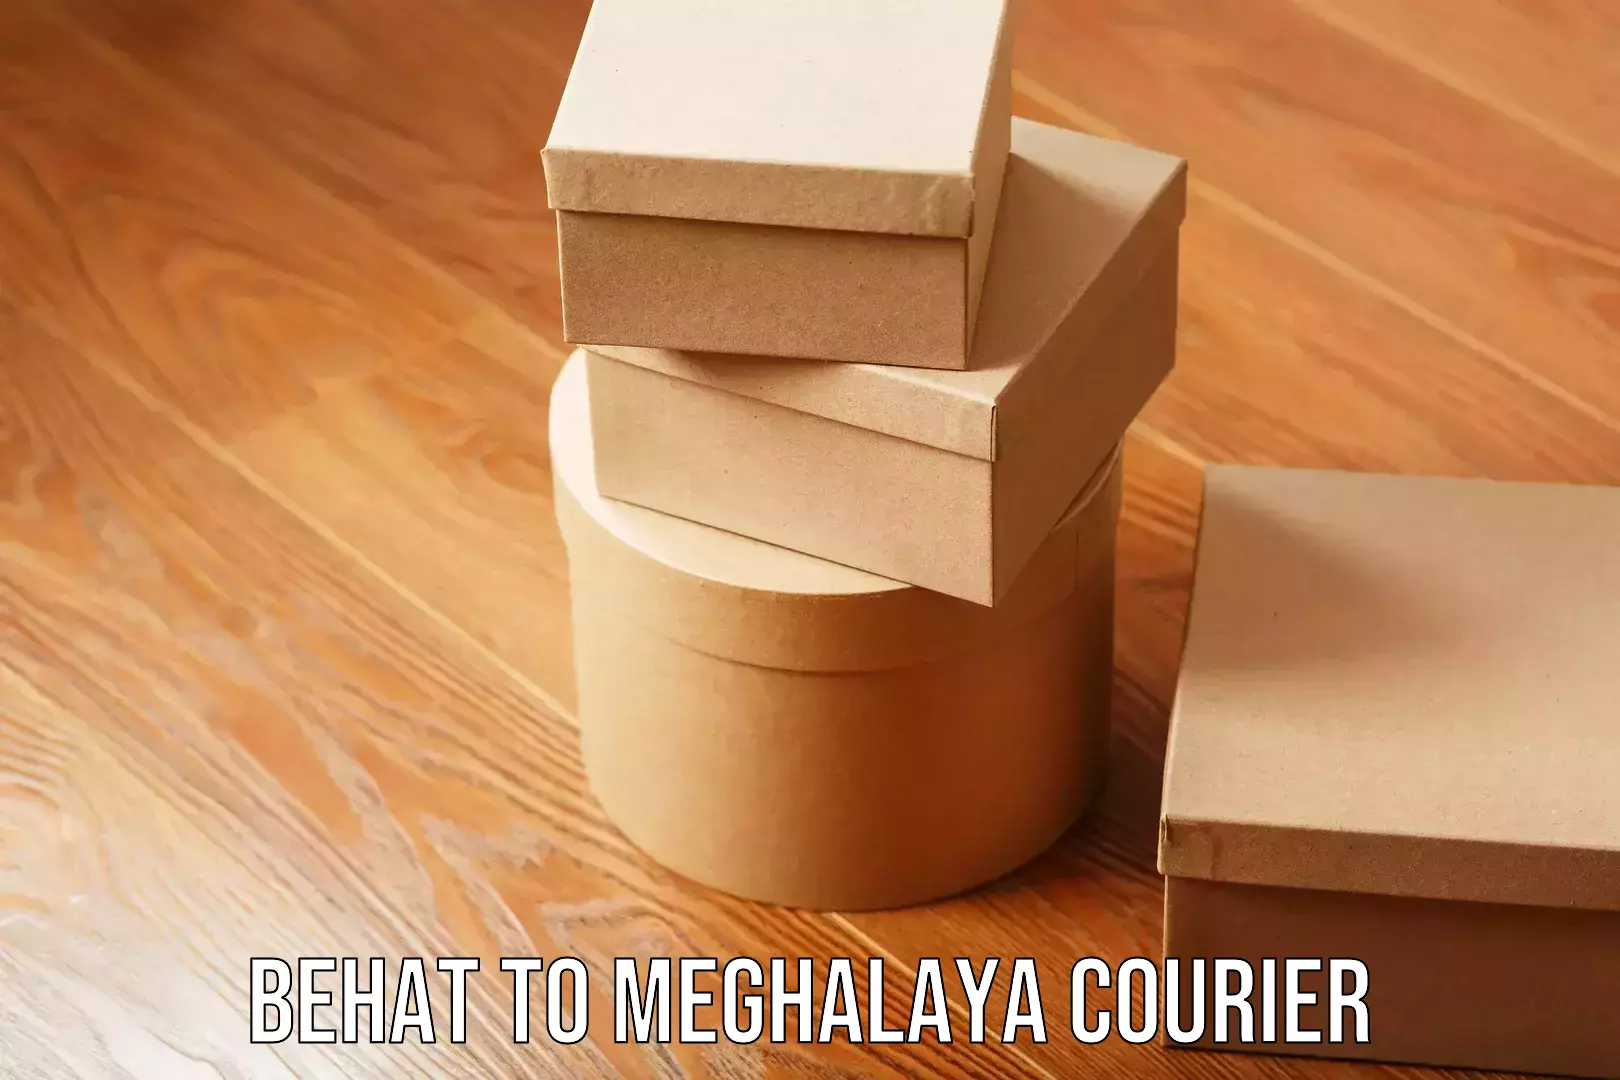 Reliable parcel services Behat to Meghalaya